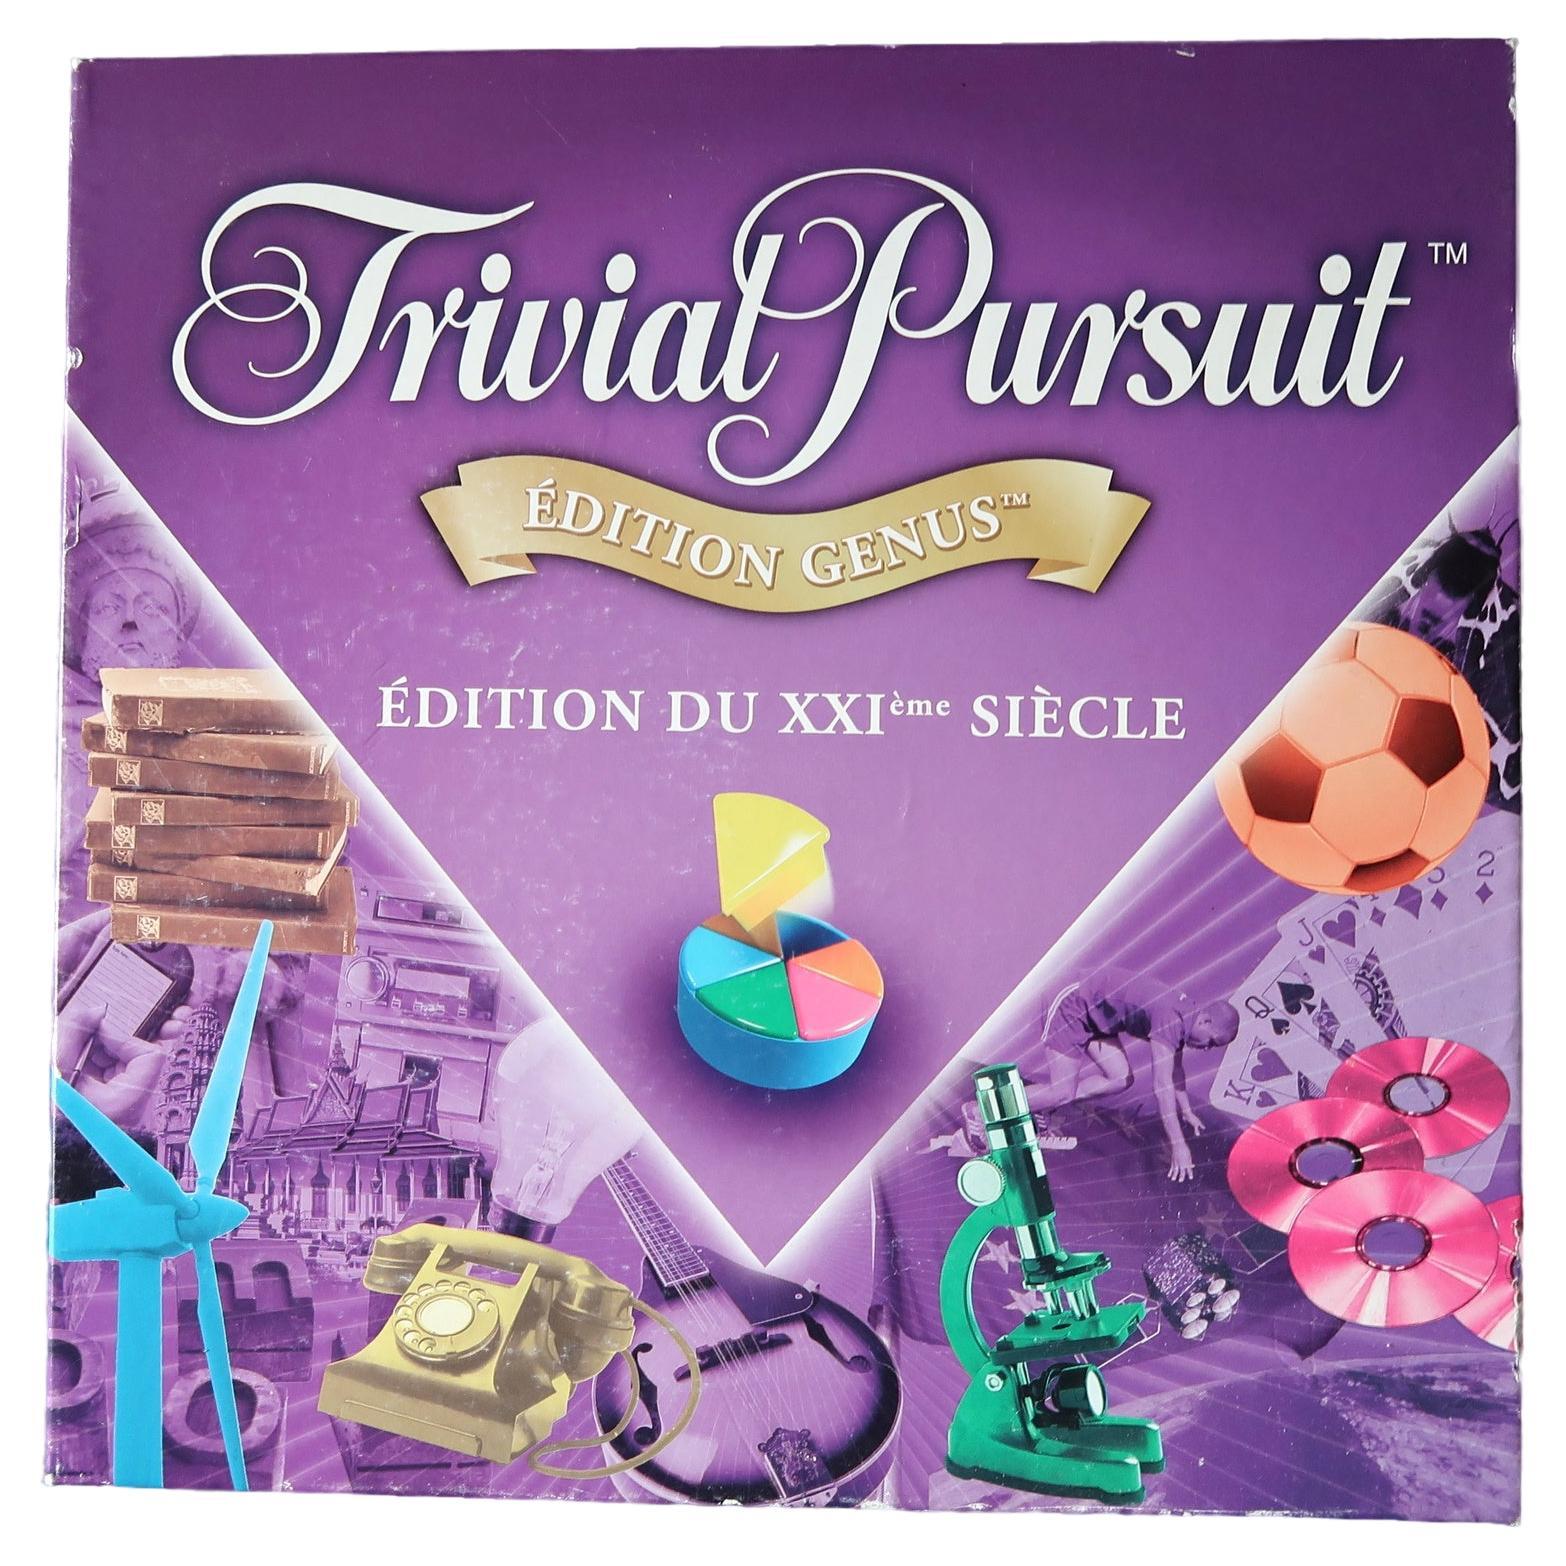 Trivial Pursuit Edition Genus - French Table Game of Knowledge and Fun - 2C03 For Sale